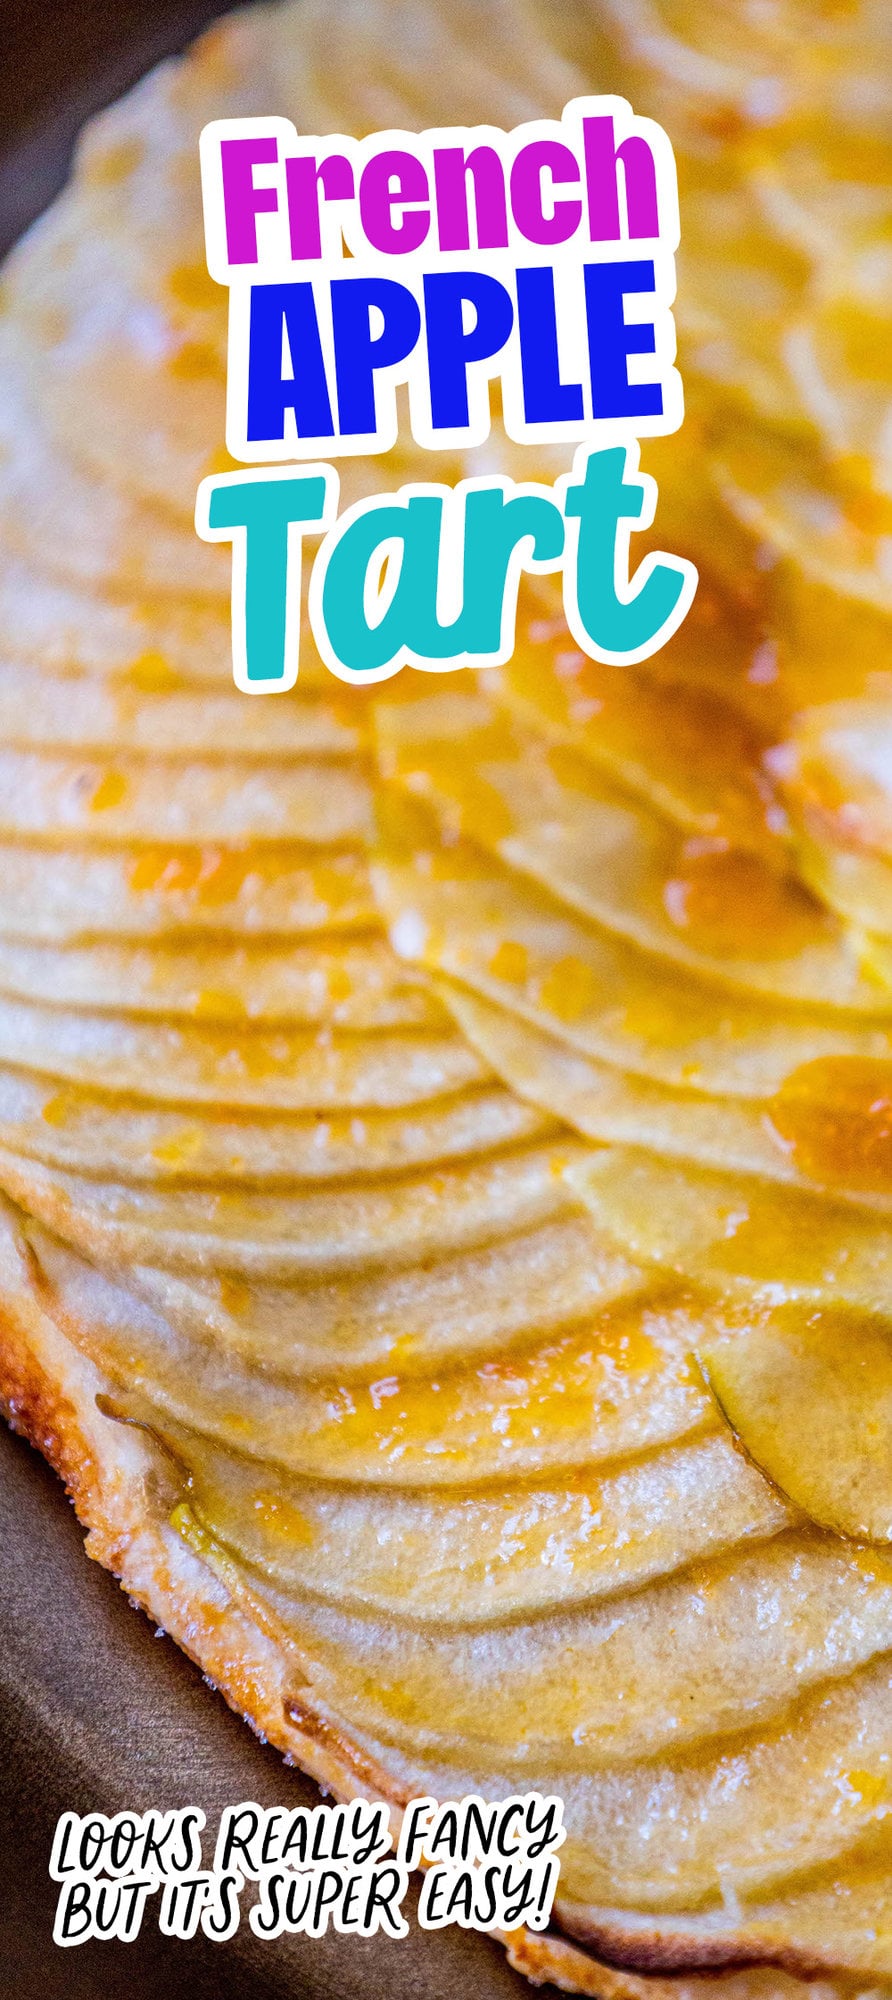 picture of a baked apple tart with thinly sliced apples baked in a circle and glazed with apricot glaze on a gold plate